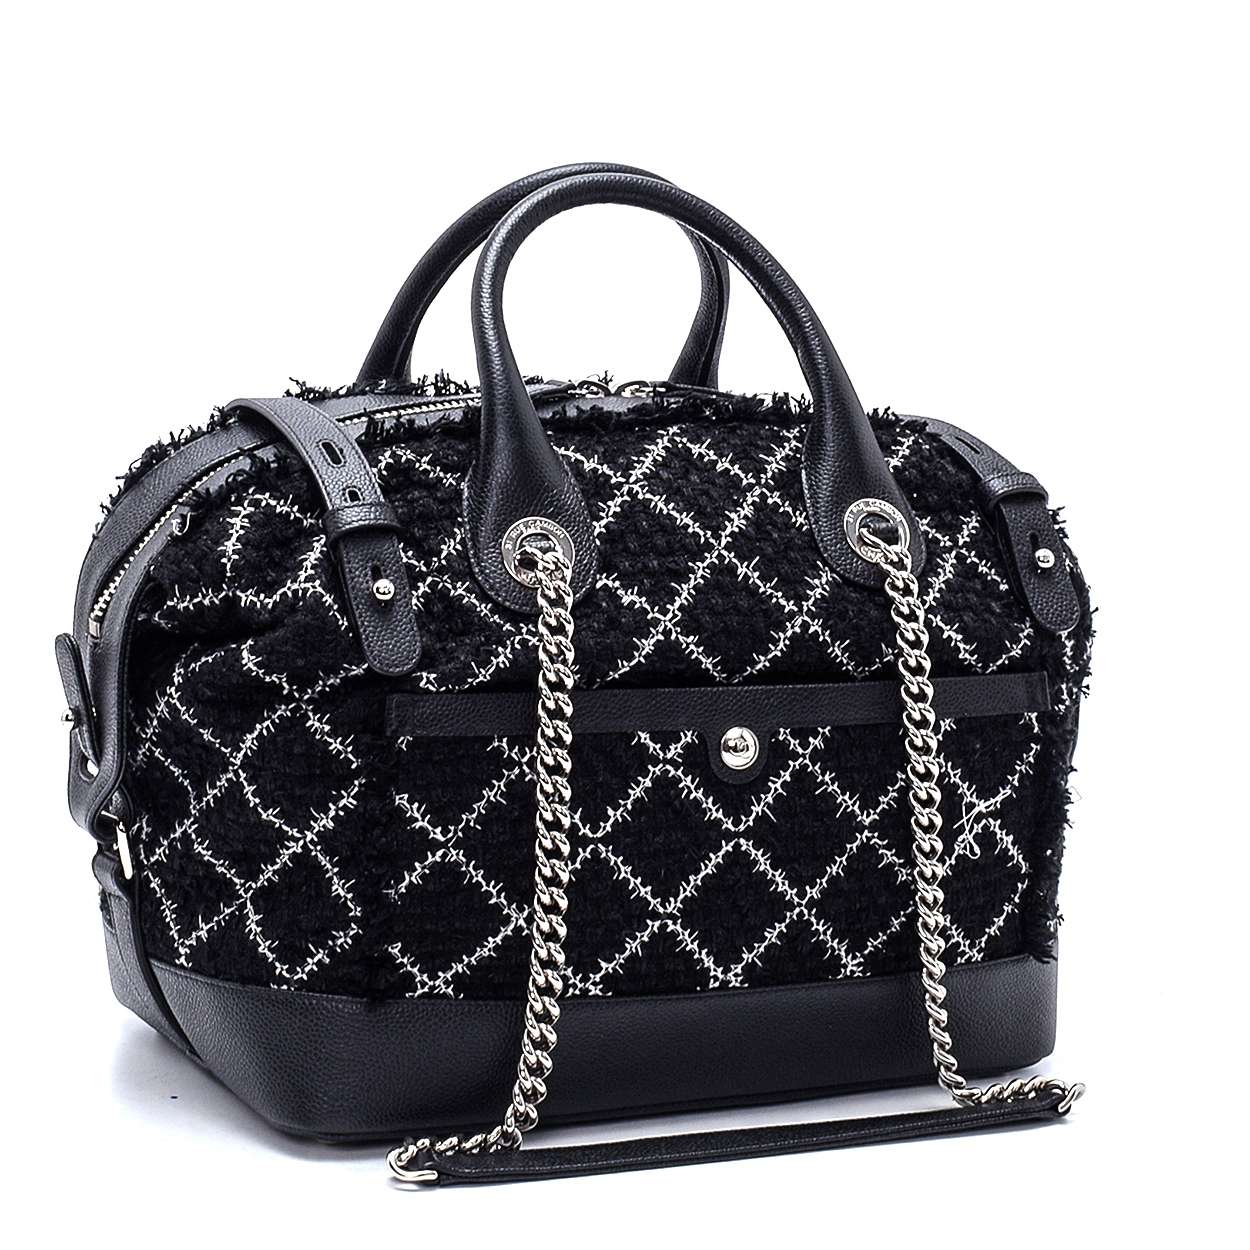 Chanel - Tweed&Leather Bowling Bag